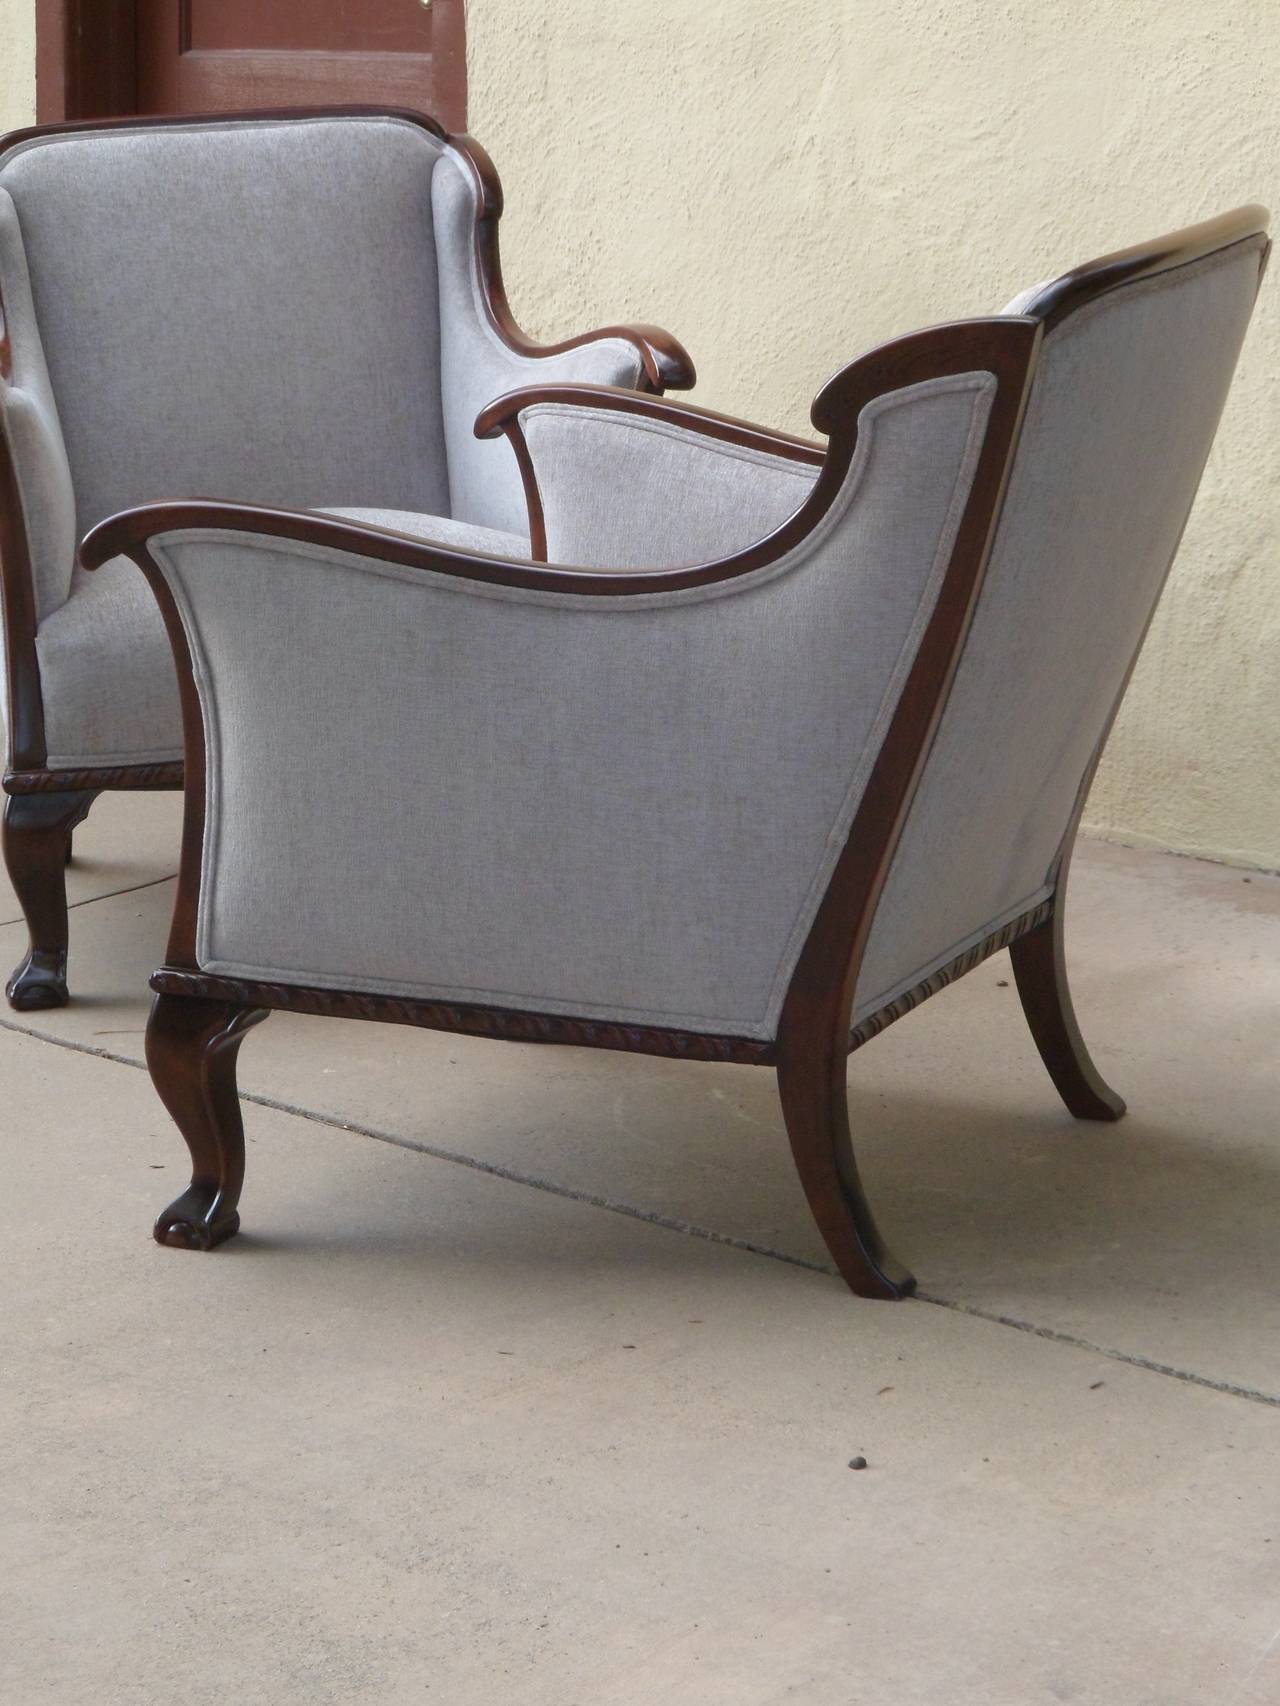 Early 20th Century Pair of Swedish Art Nouveau Armchairs in Taupe Velvet, circa 1910